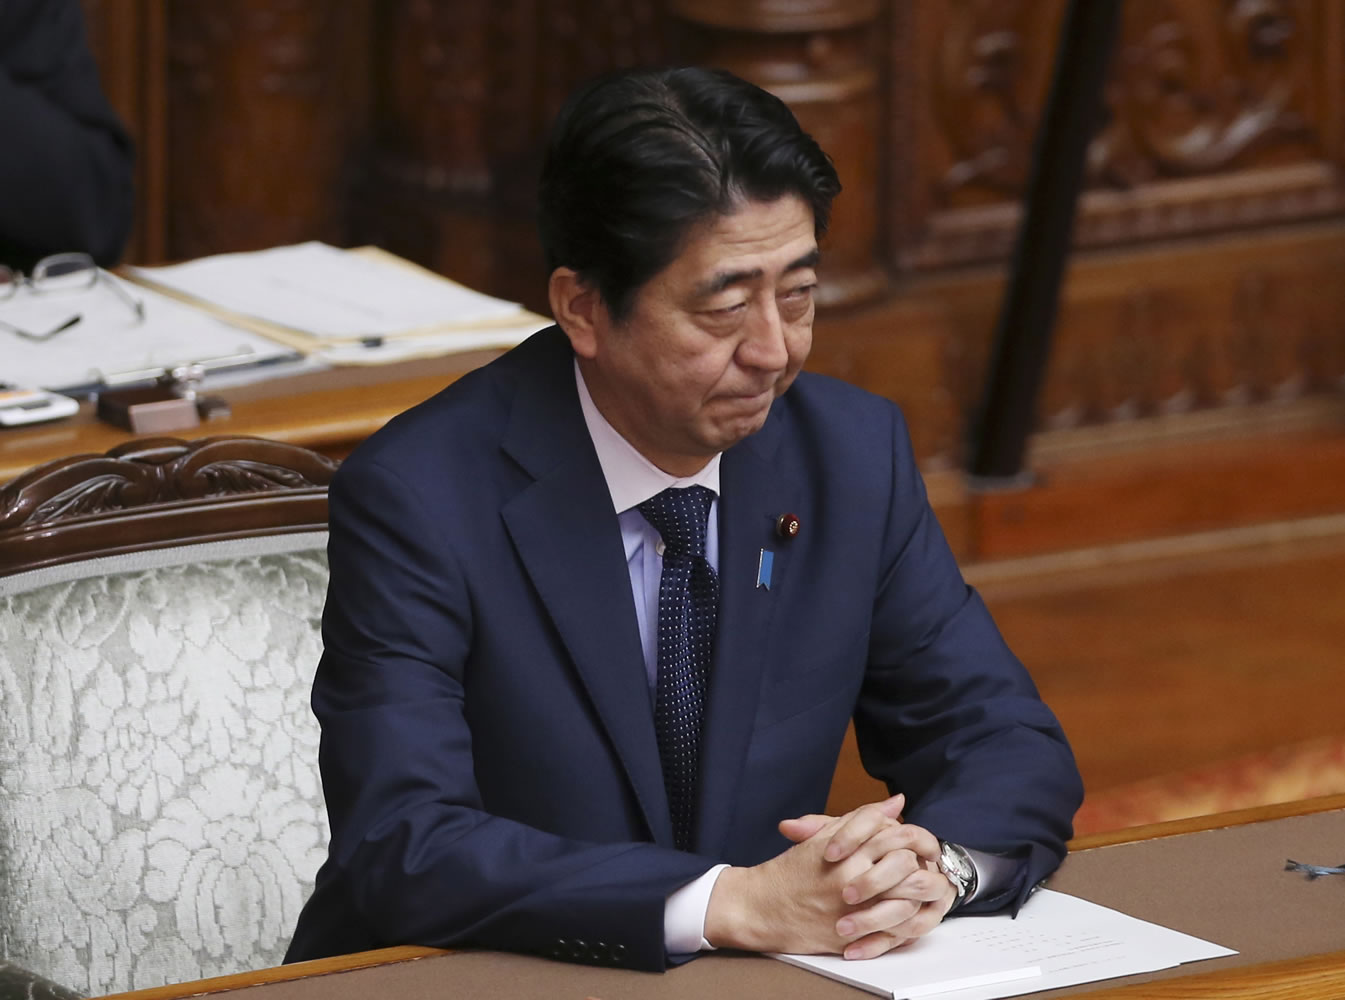 Japanese Prime Minister Shinzo Abe attends the upper house plenary diet session in Tokyo Friday, Sept. 18, 2015 after a censure motion against him was filed by an opposition party in their attempt to block contentious security bills that Abe's ruling party is eager to get final approval by the upper house. The bills would ease restrictions on what the military can do, a highly sensitive issue in a country where many take pride in the postwar pacifist constitution.